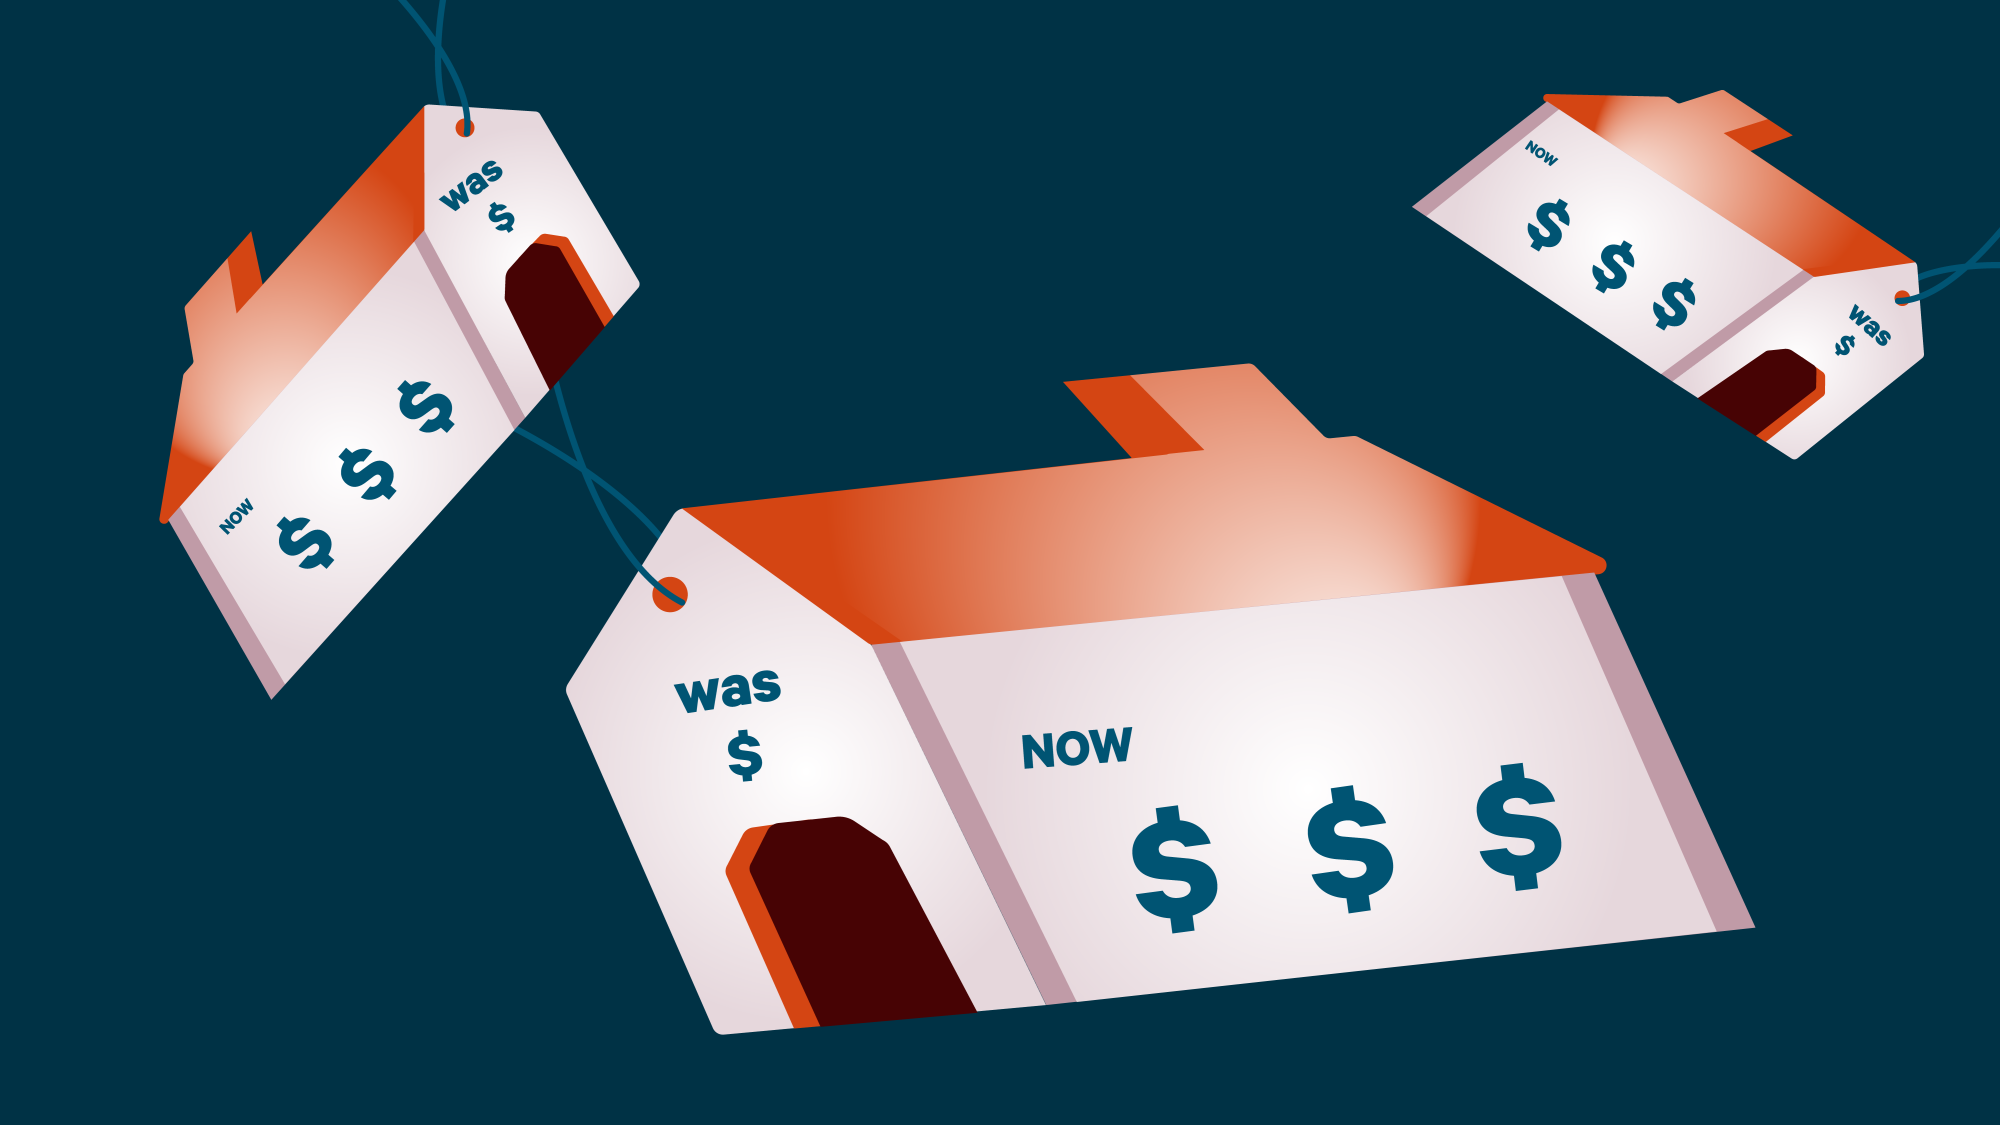 illustration of three house-shaped price-tags, each labeled "was $, now $$$" 